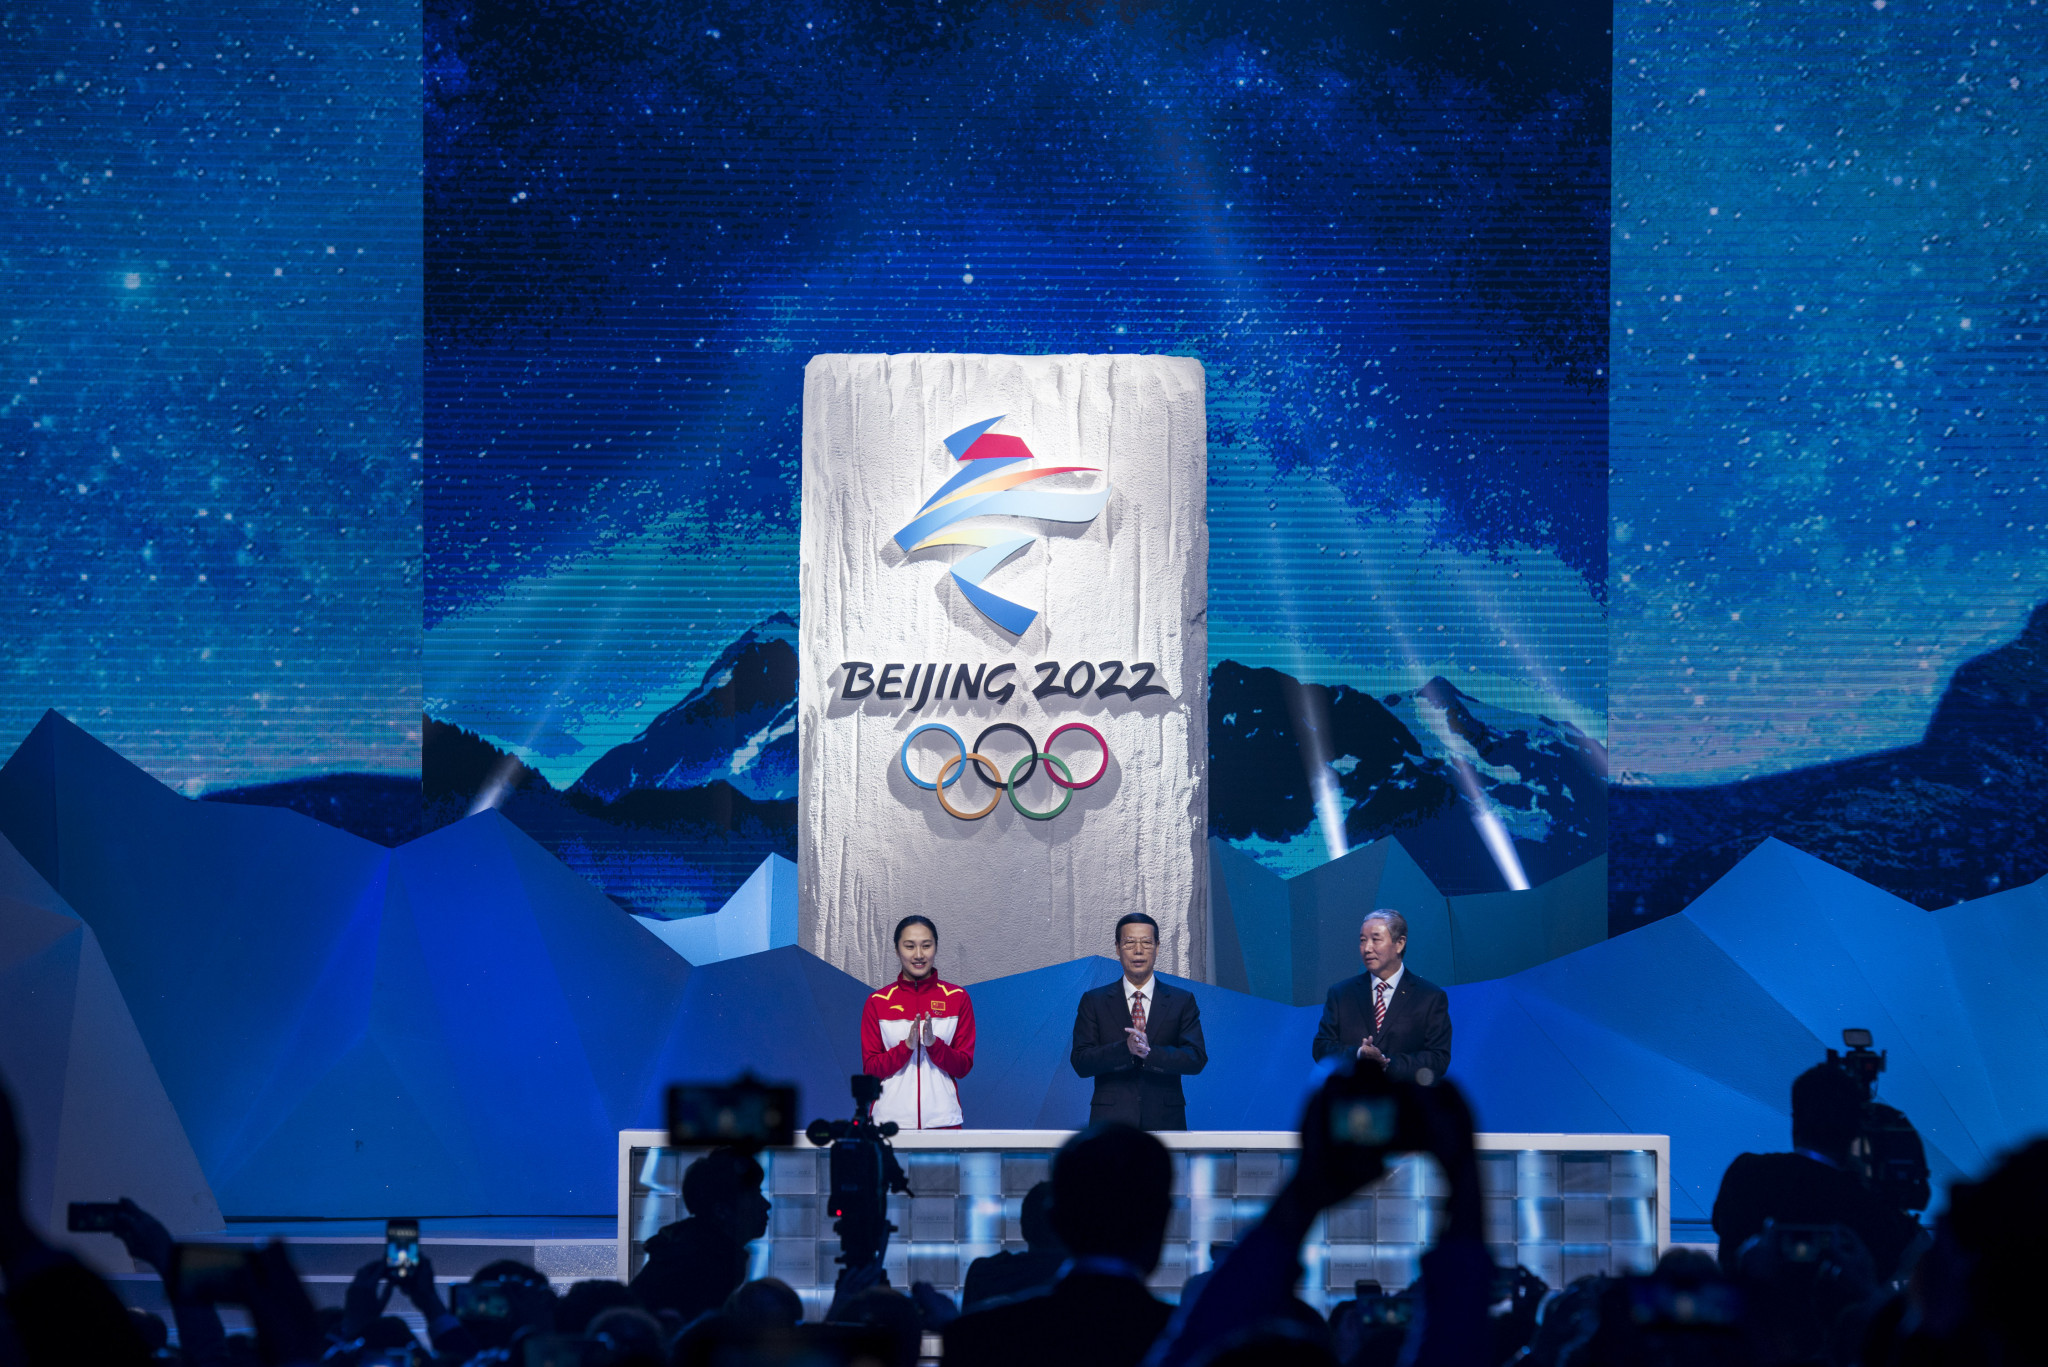 The emblems for the Games were revealed at a ceremony at the National Aquatic Centre in Beijing ©Getty Images